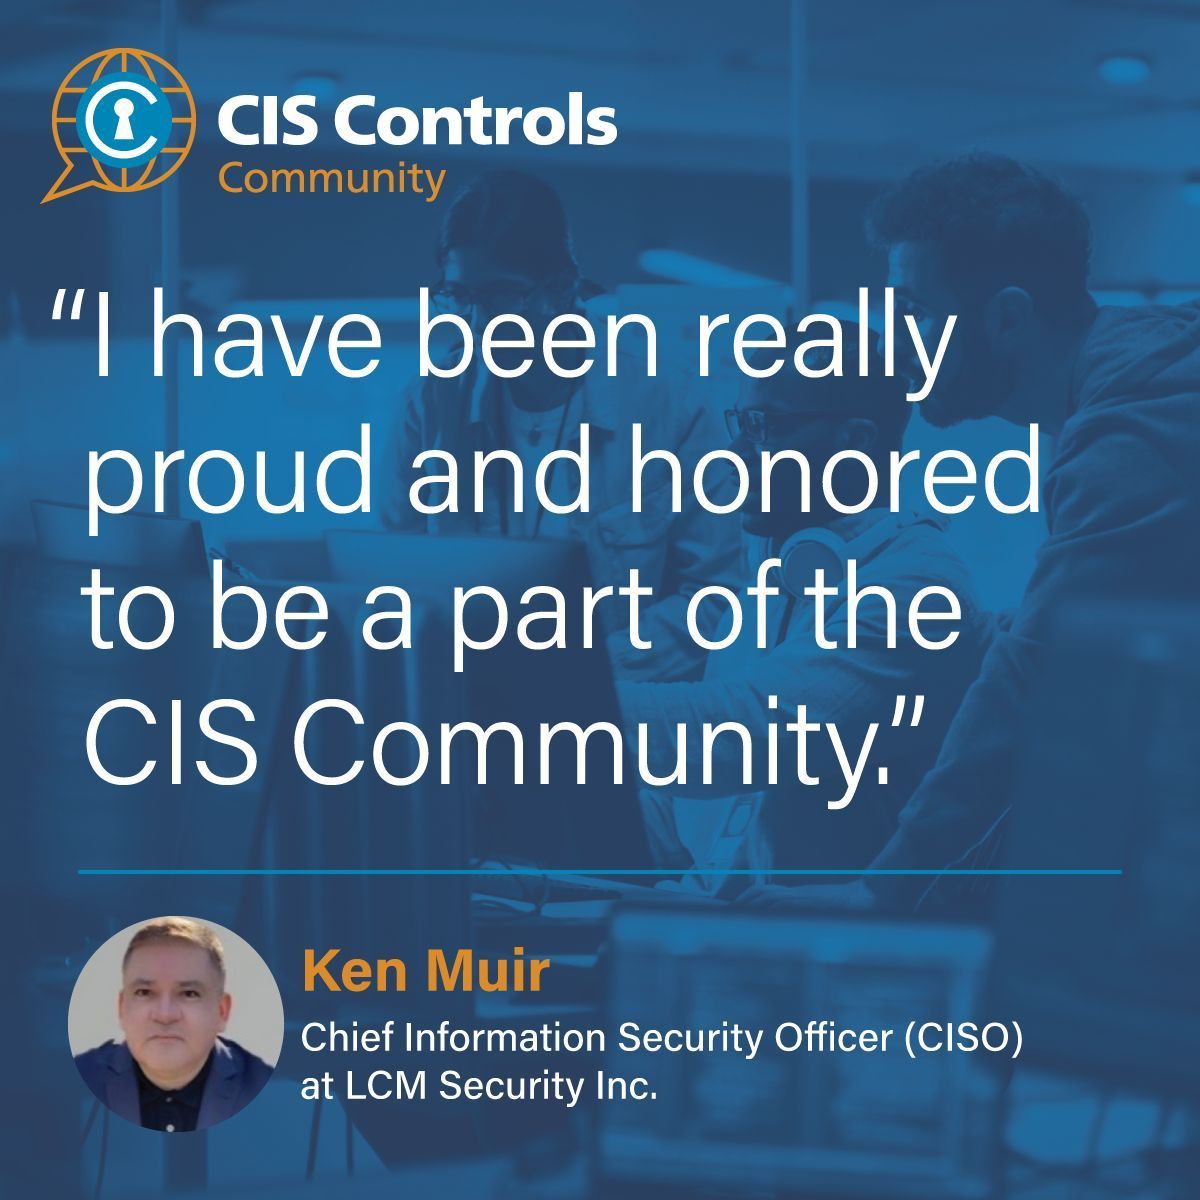 What's good for your career and a way to give back? Ken Muir says it's being a CIS Controls community member and volunteer. bit.ly/48YSs86 #CISControls #cybersecurity #VolunteerSpotlight